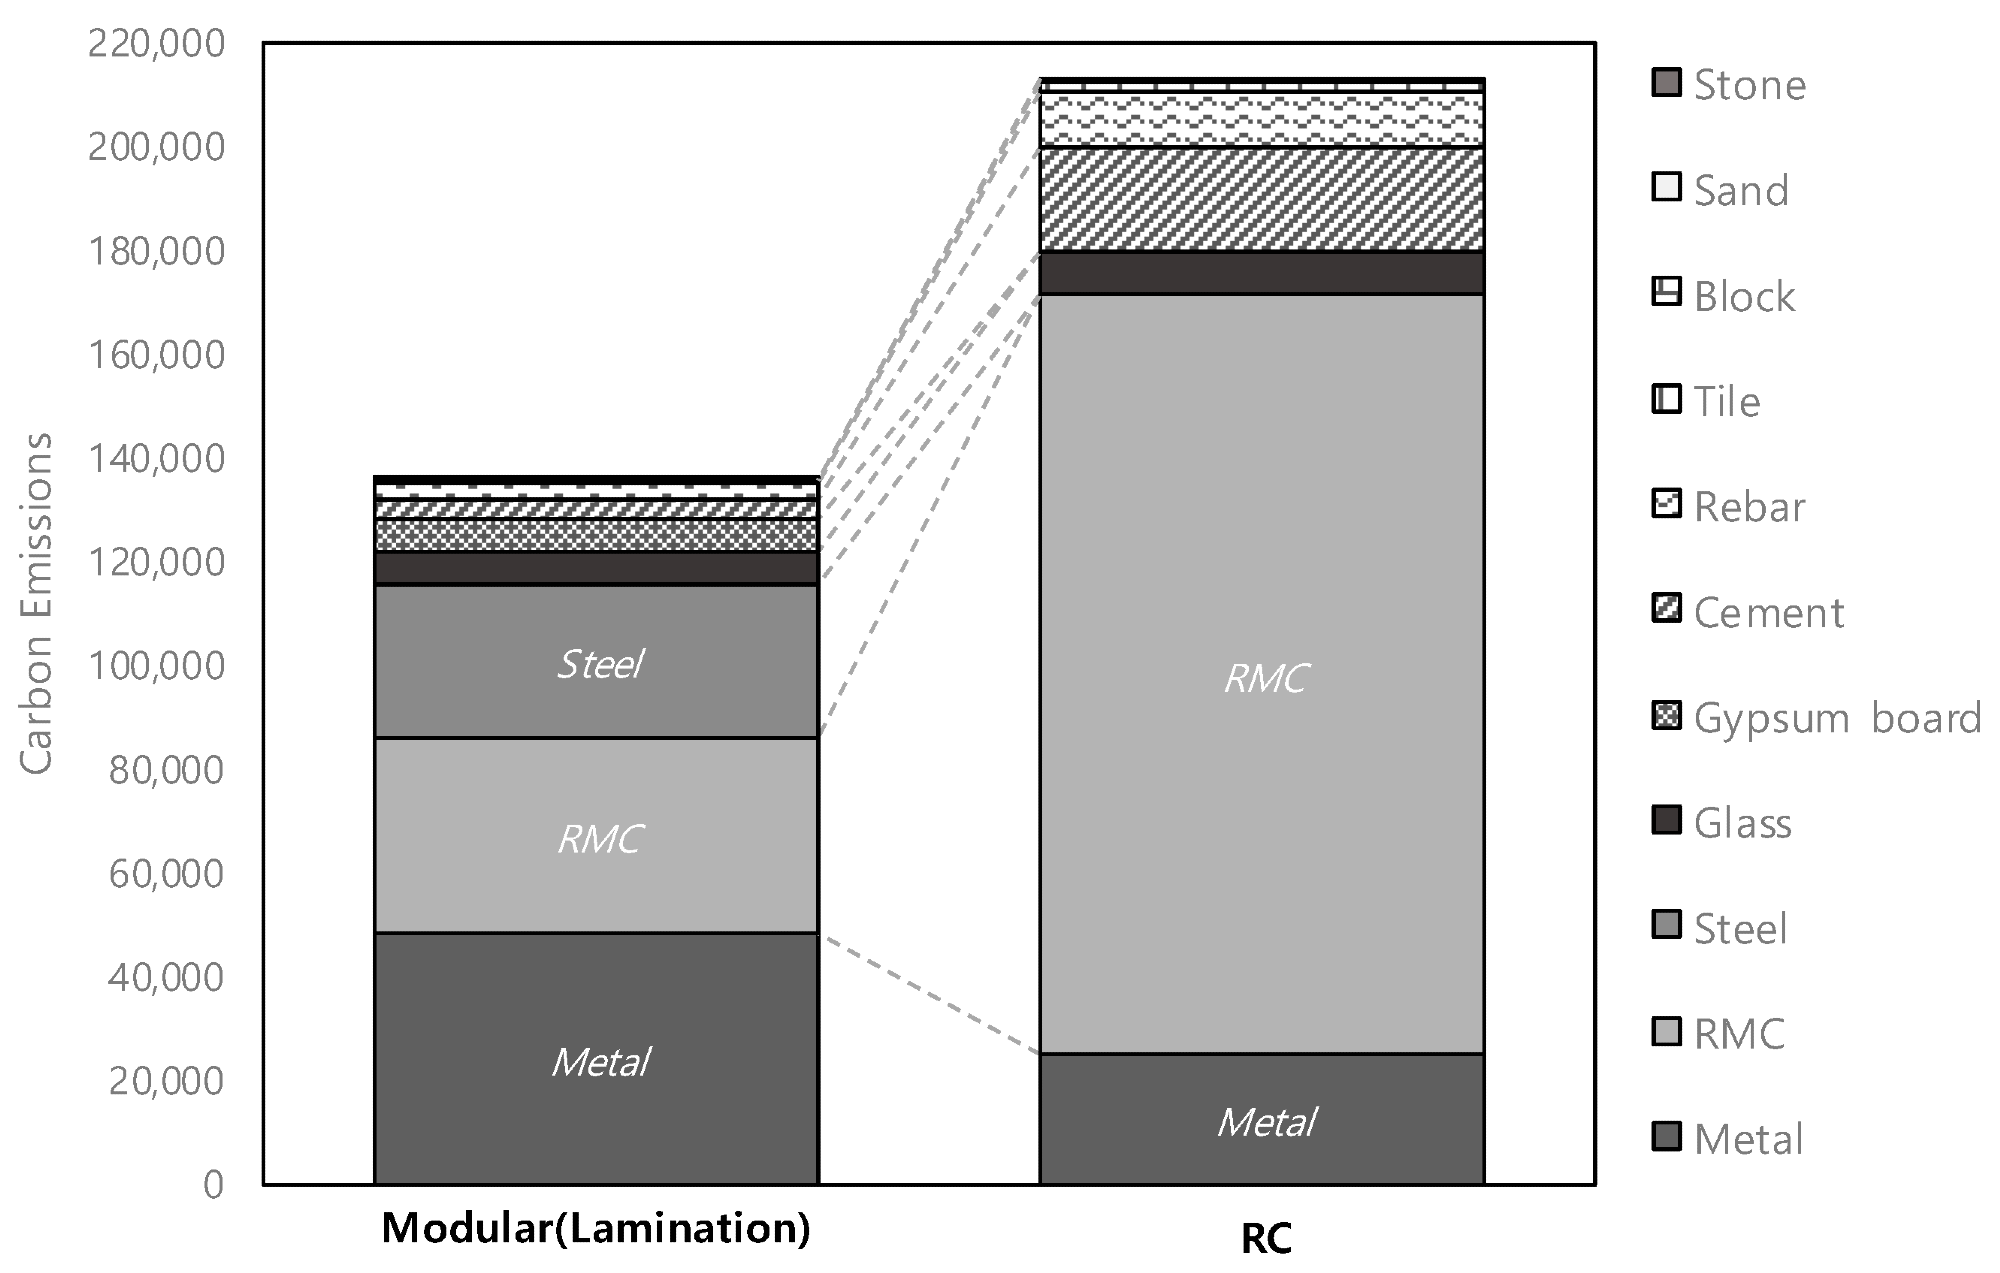 Comparison of the modular and RC building embodied carbon emissions.